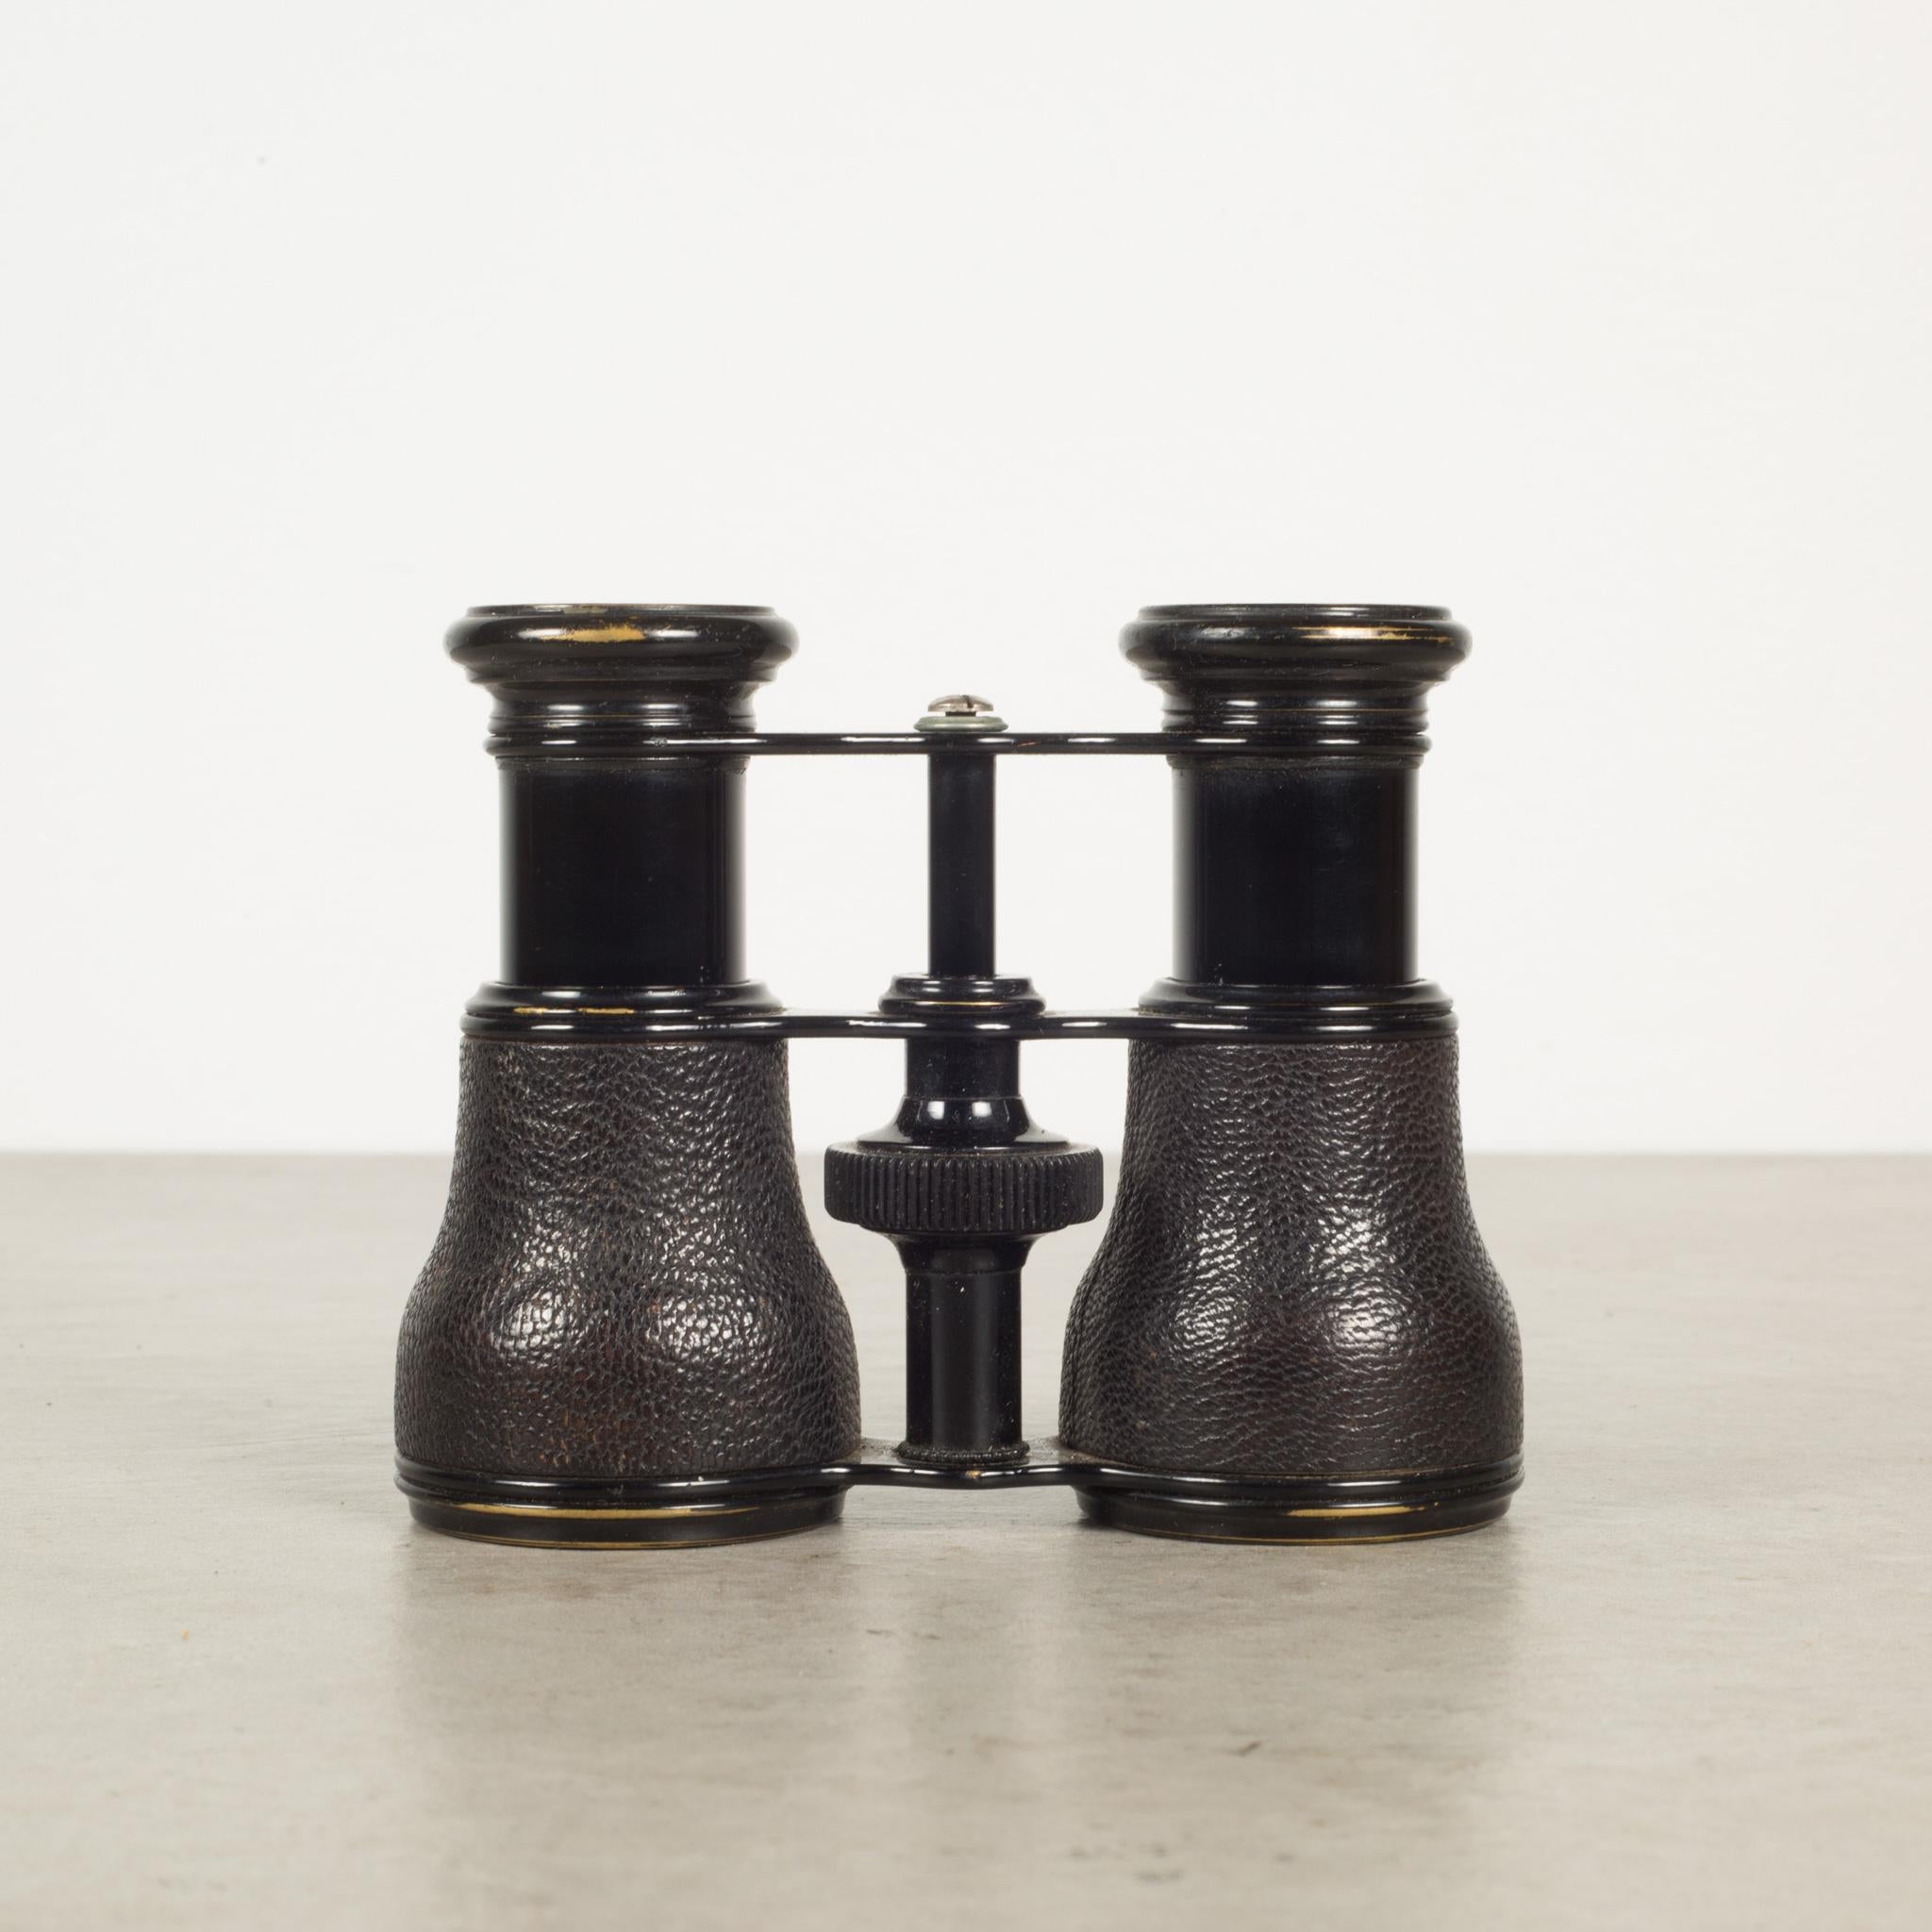 ABOUT

A pair of 19th century leather wrapped binoculars with original leather case. Good working order with clear binocular viewing. This piece has retained its original finish

 CREATOR LeMaire, Paris, France.
 DATE OF MANUFACTURE c.1880s
